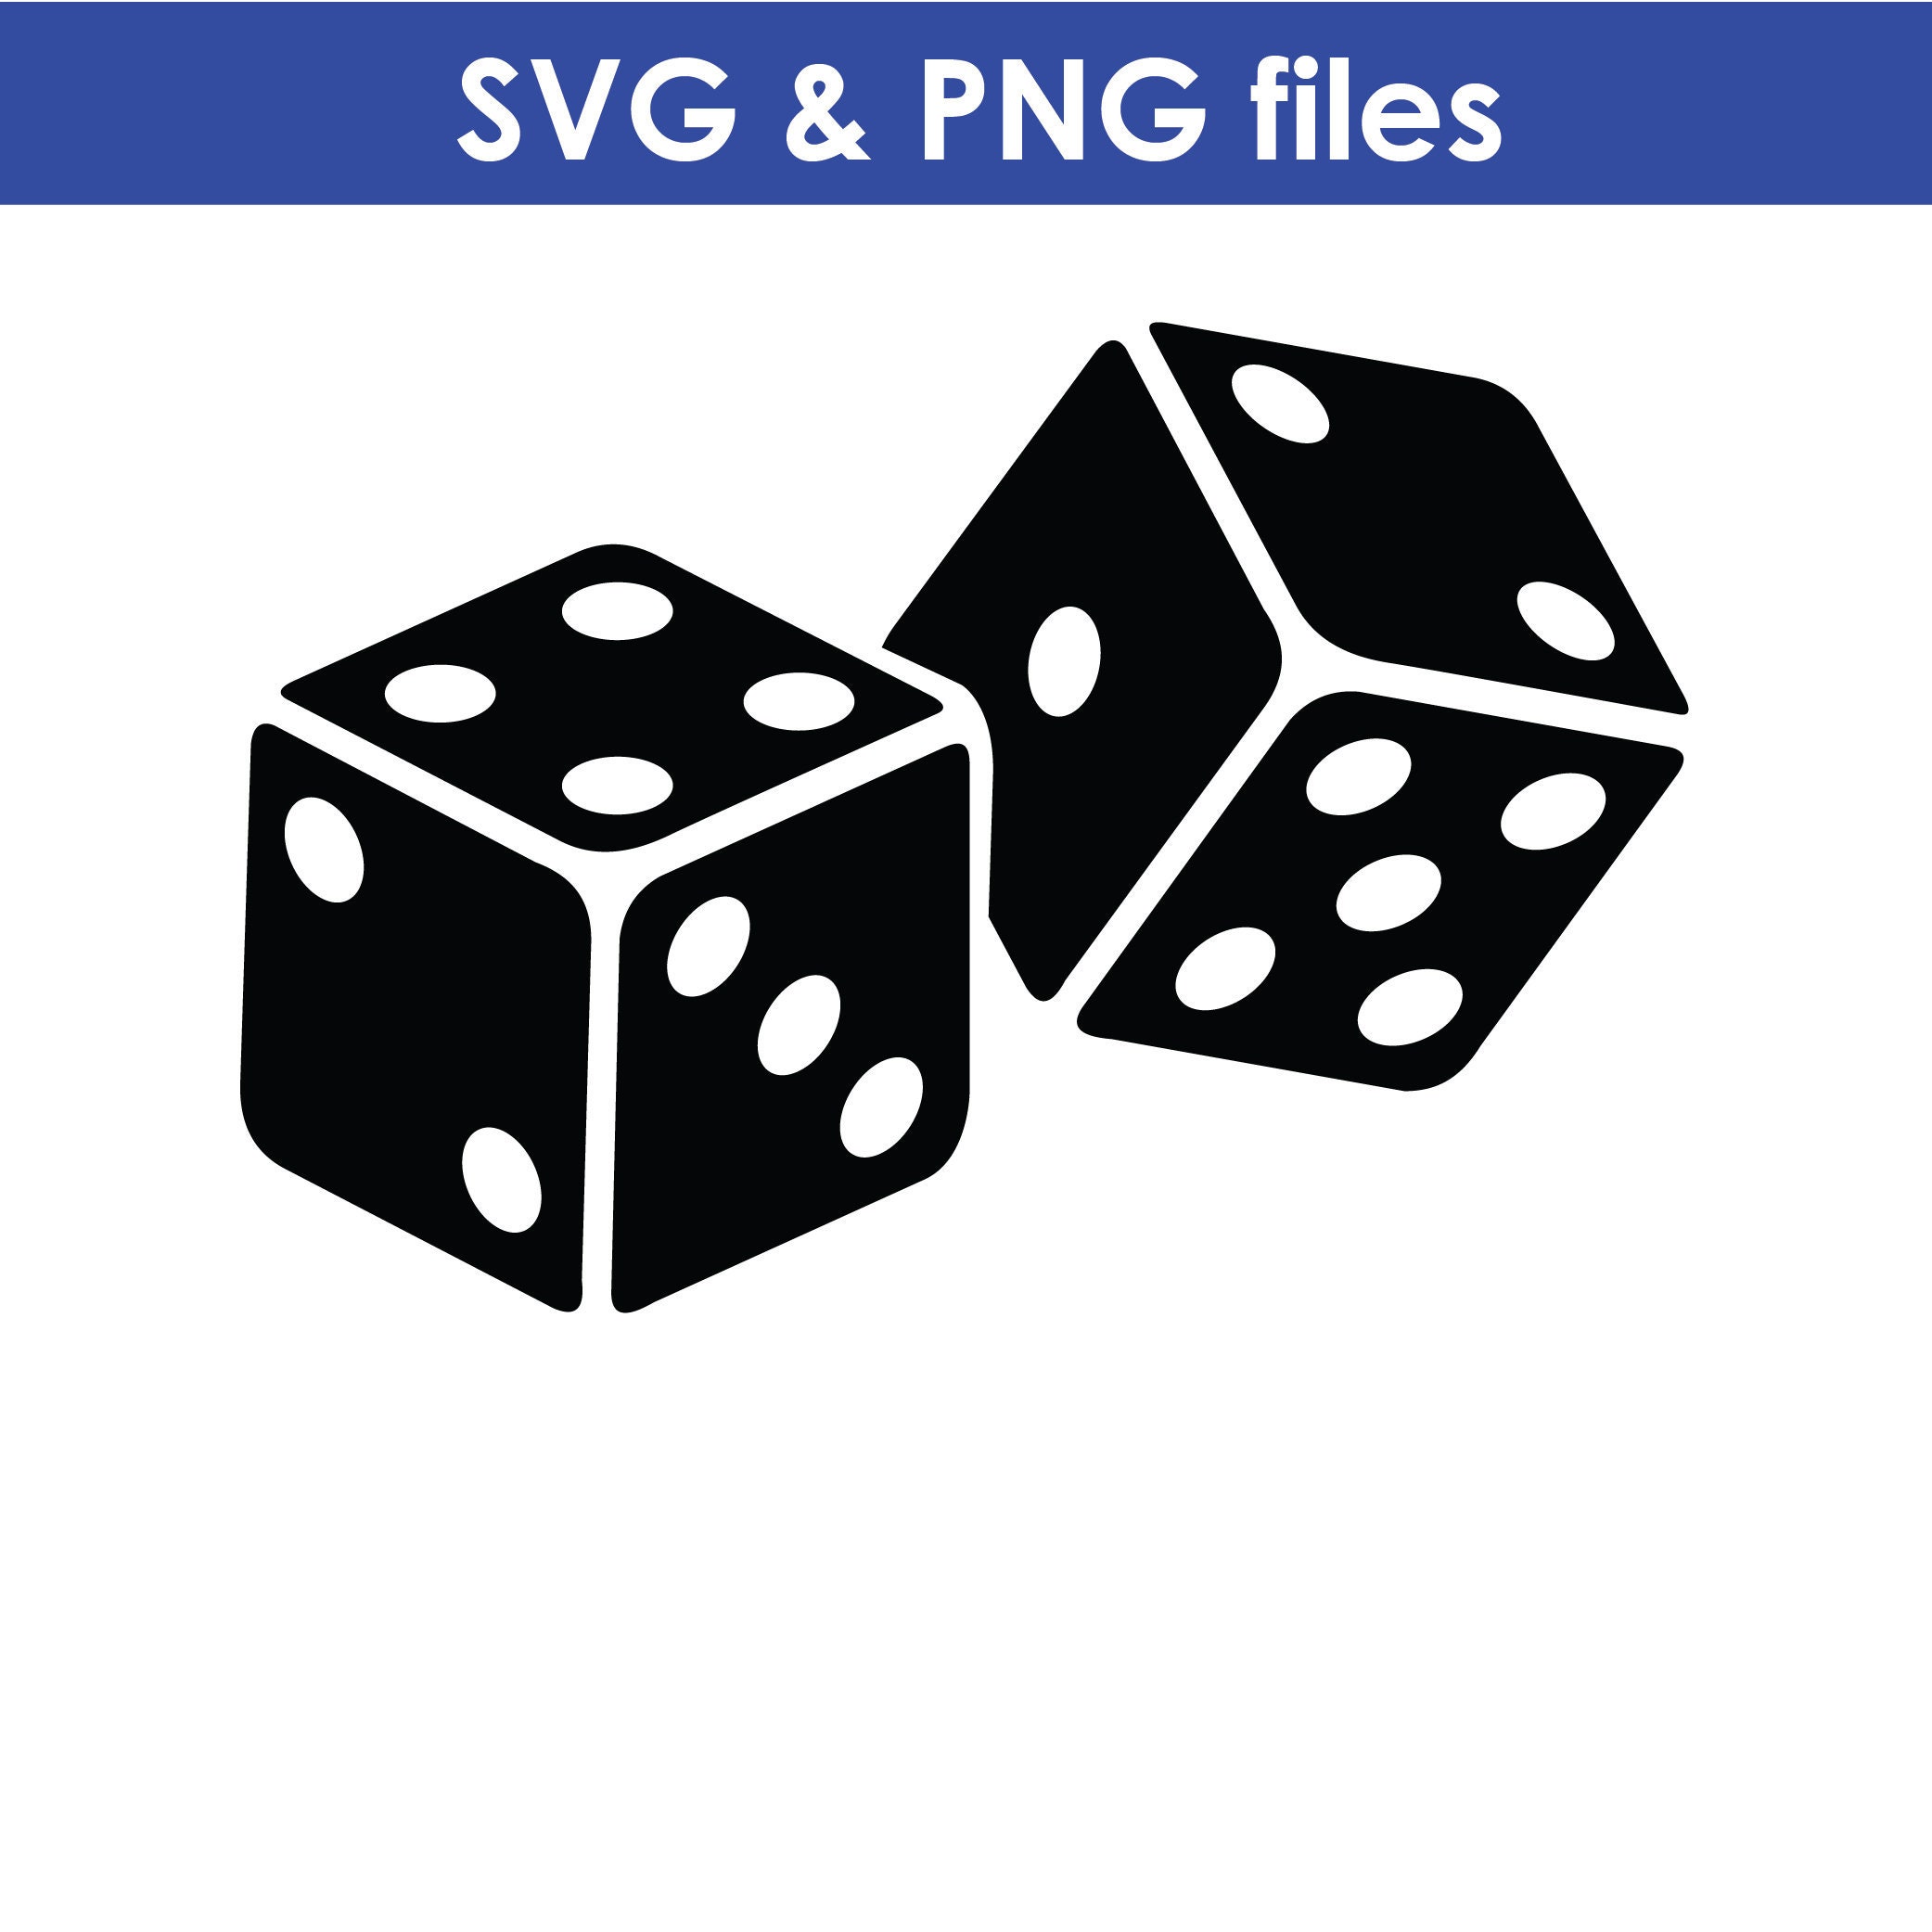 Two SVG